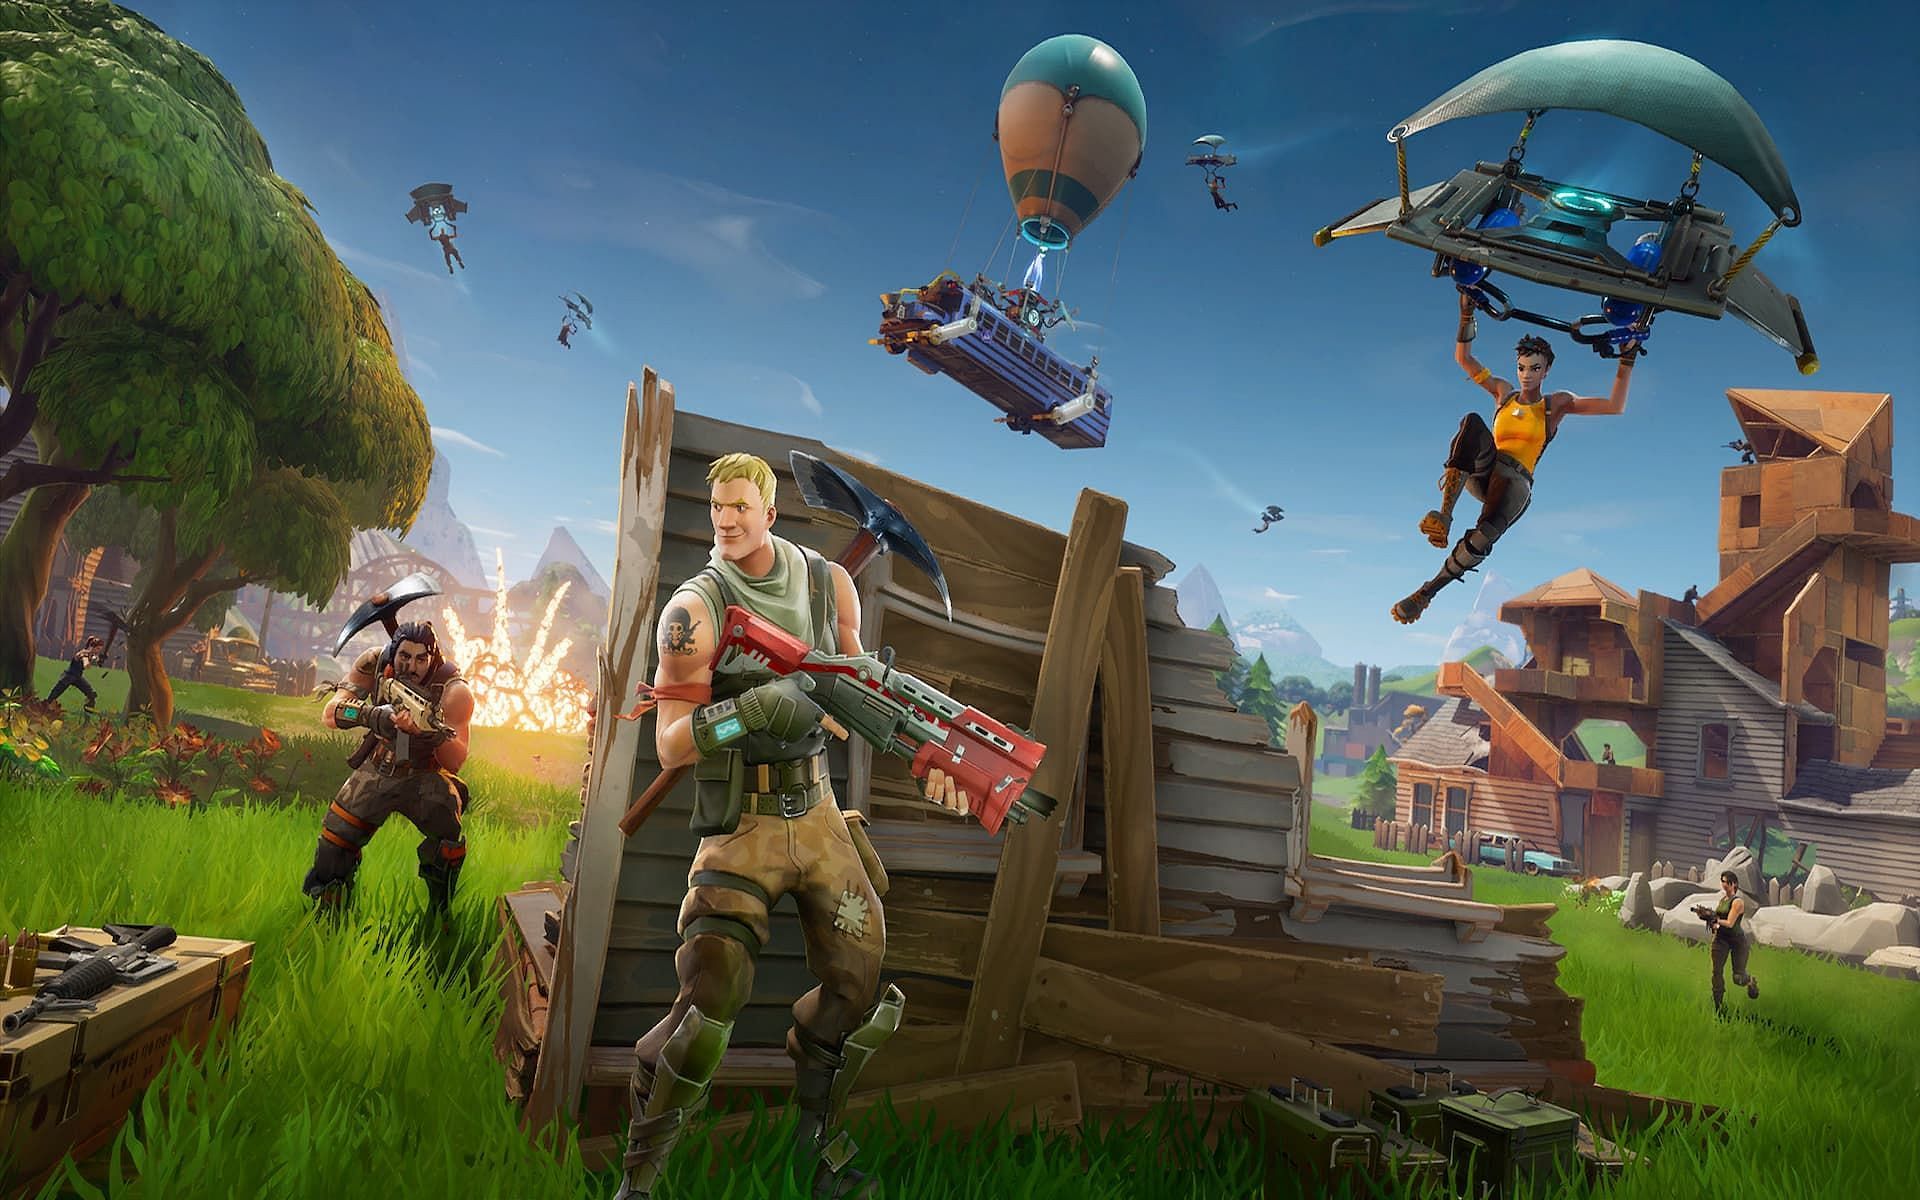 A look at one of the first promotional images for Fortnite (Image via Epic Games)